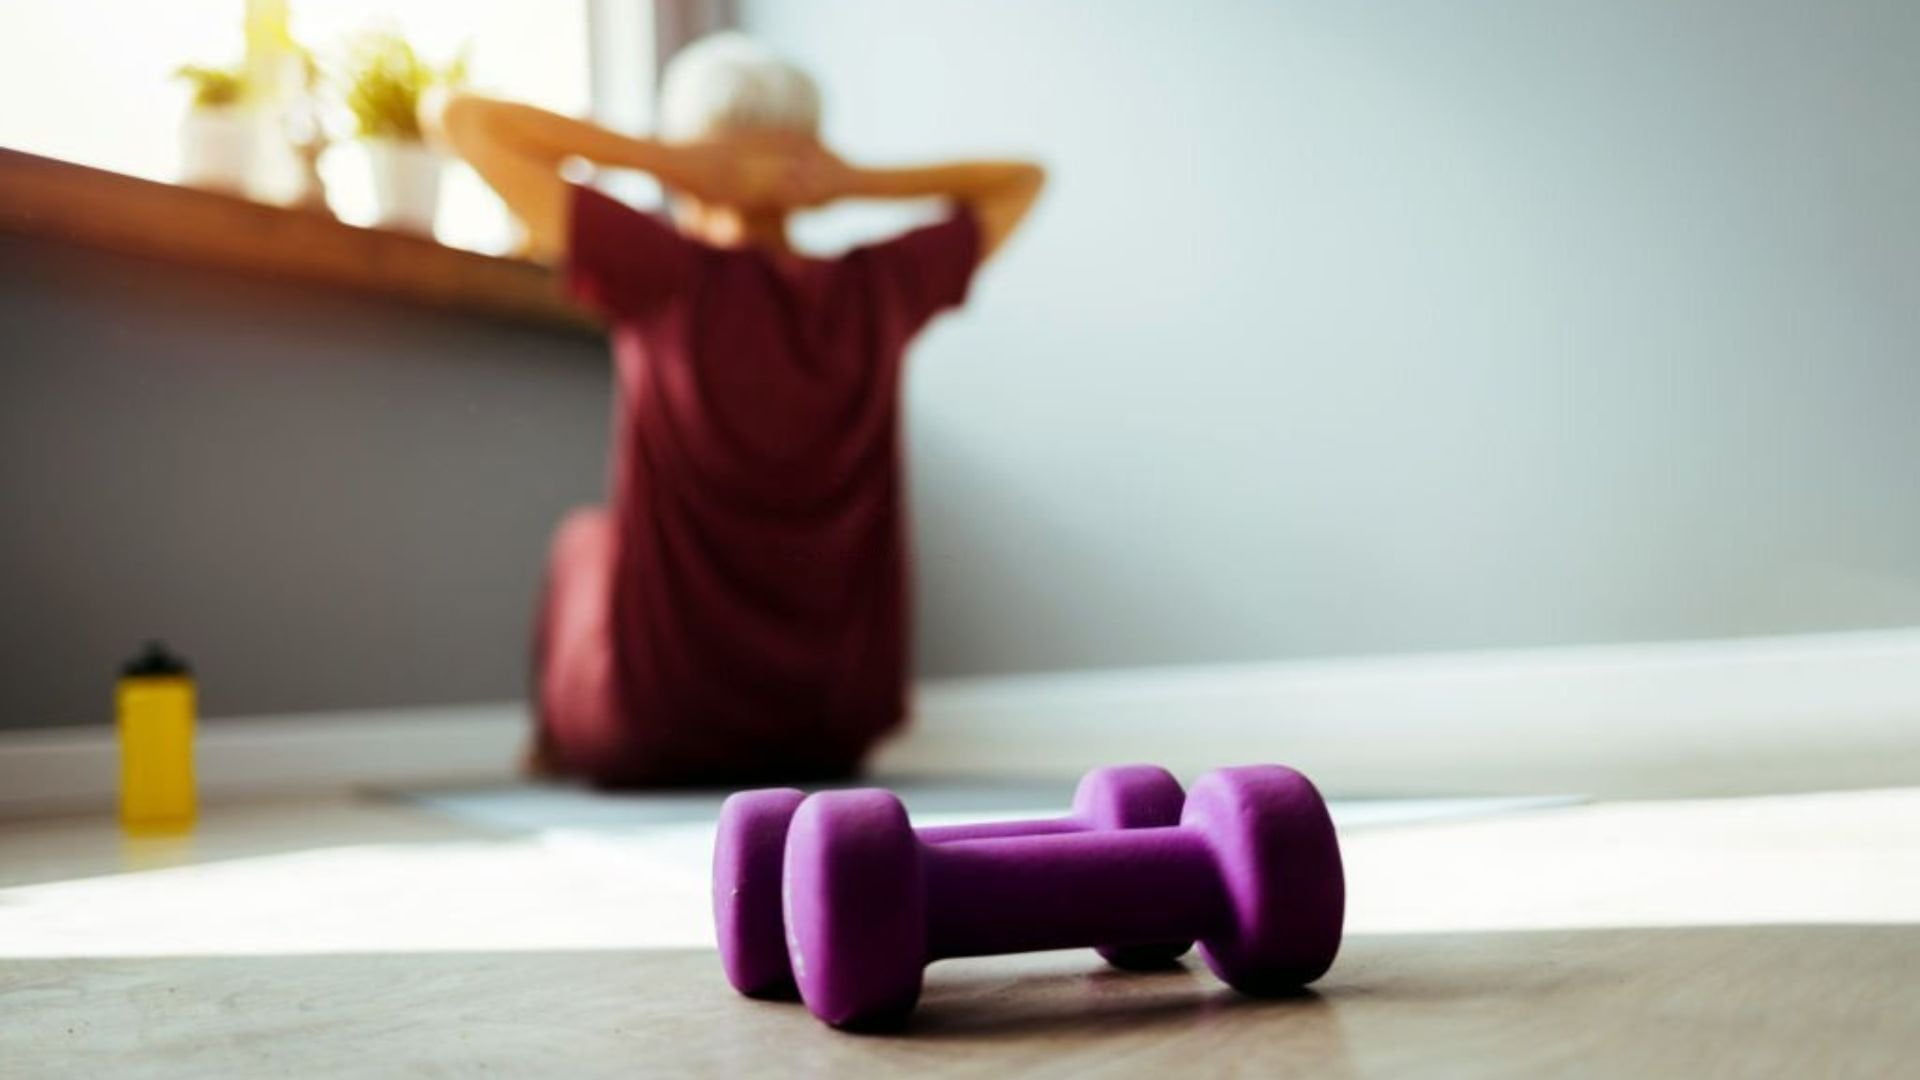 Top 10 Fitness Exercises For The Elderly